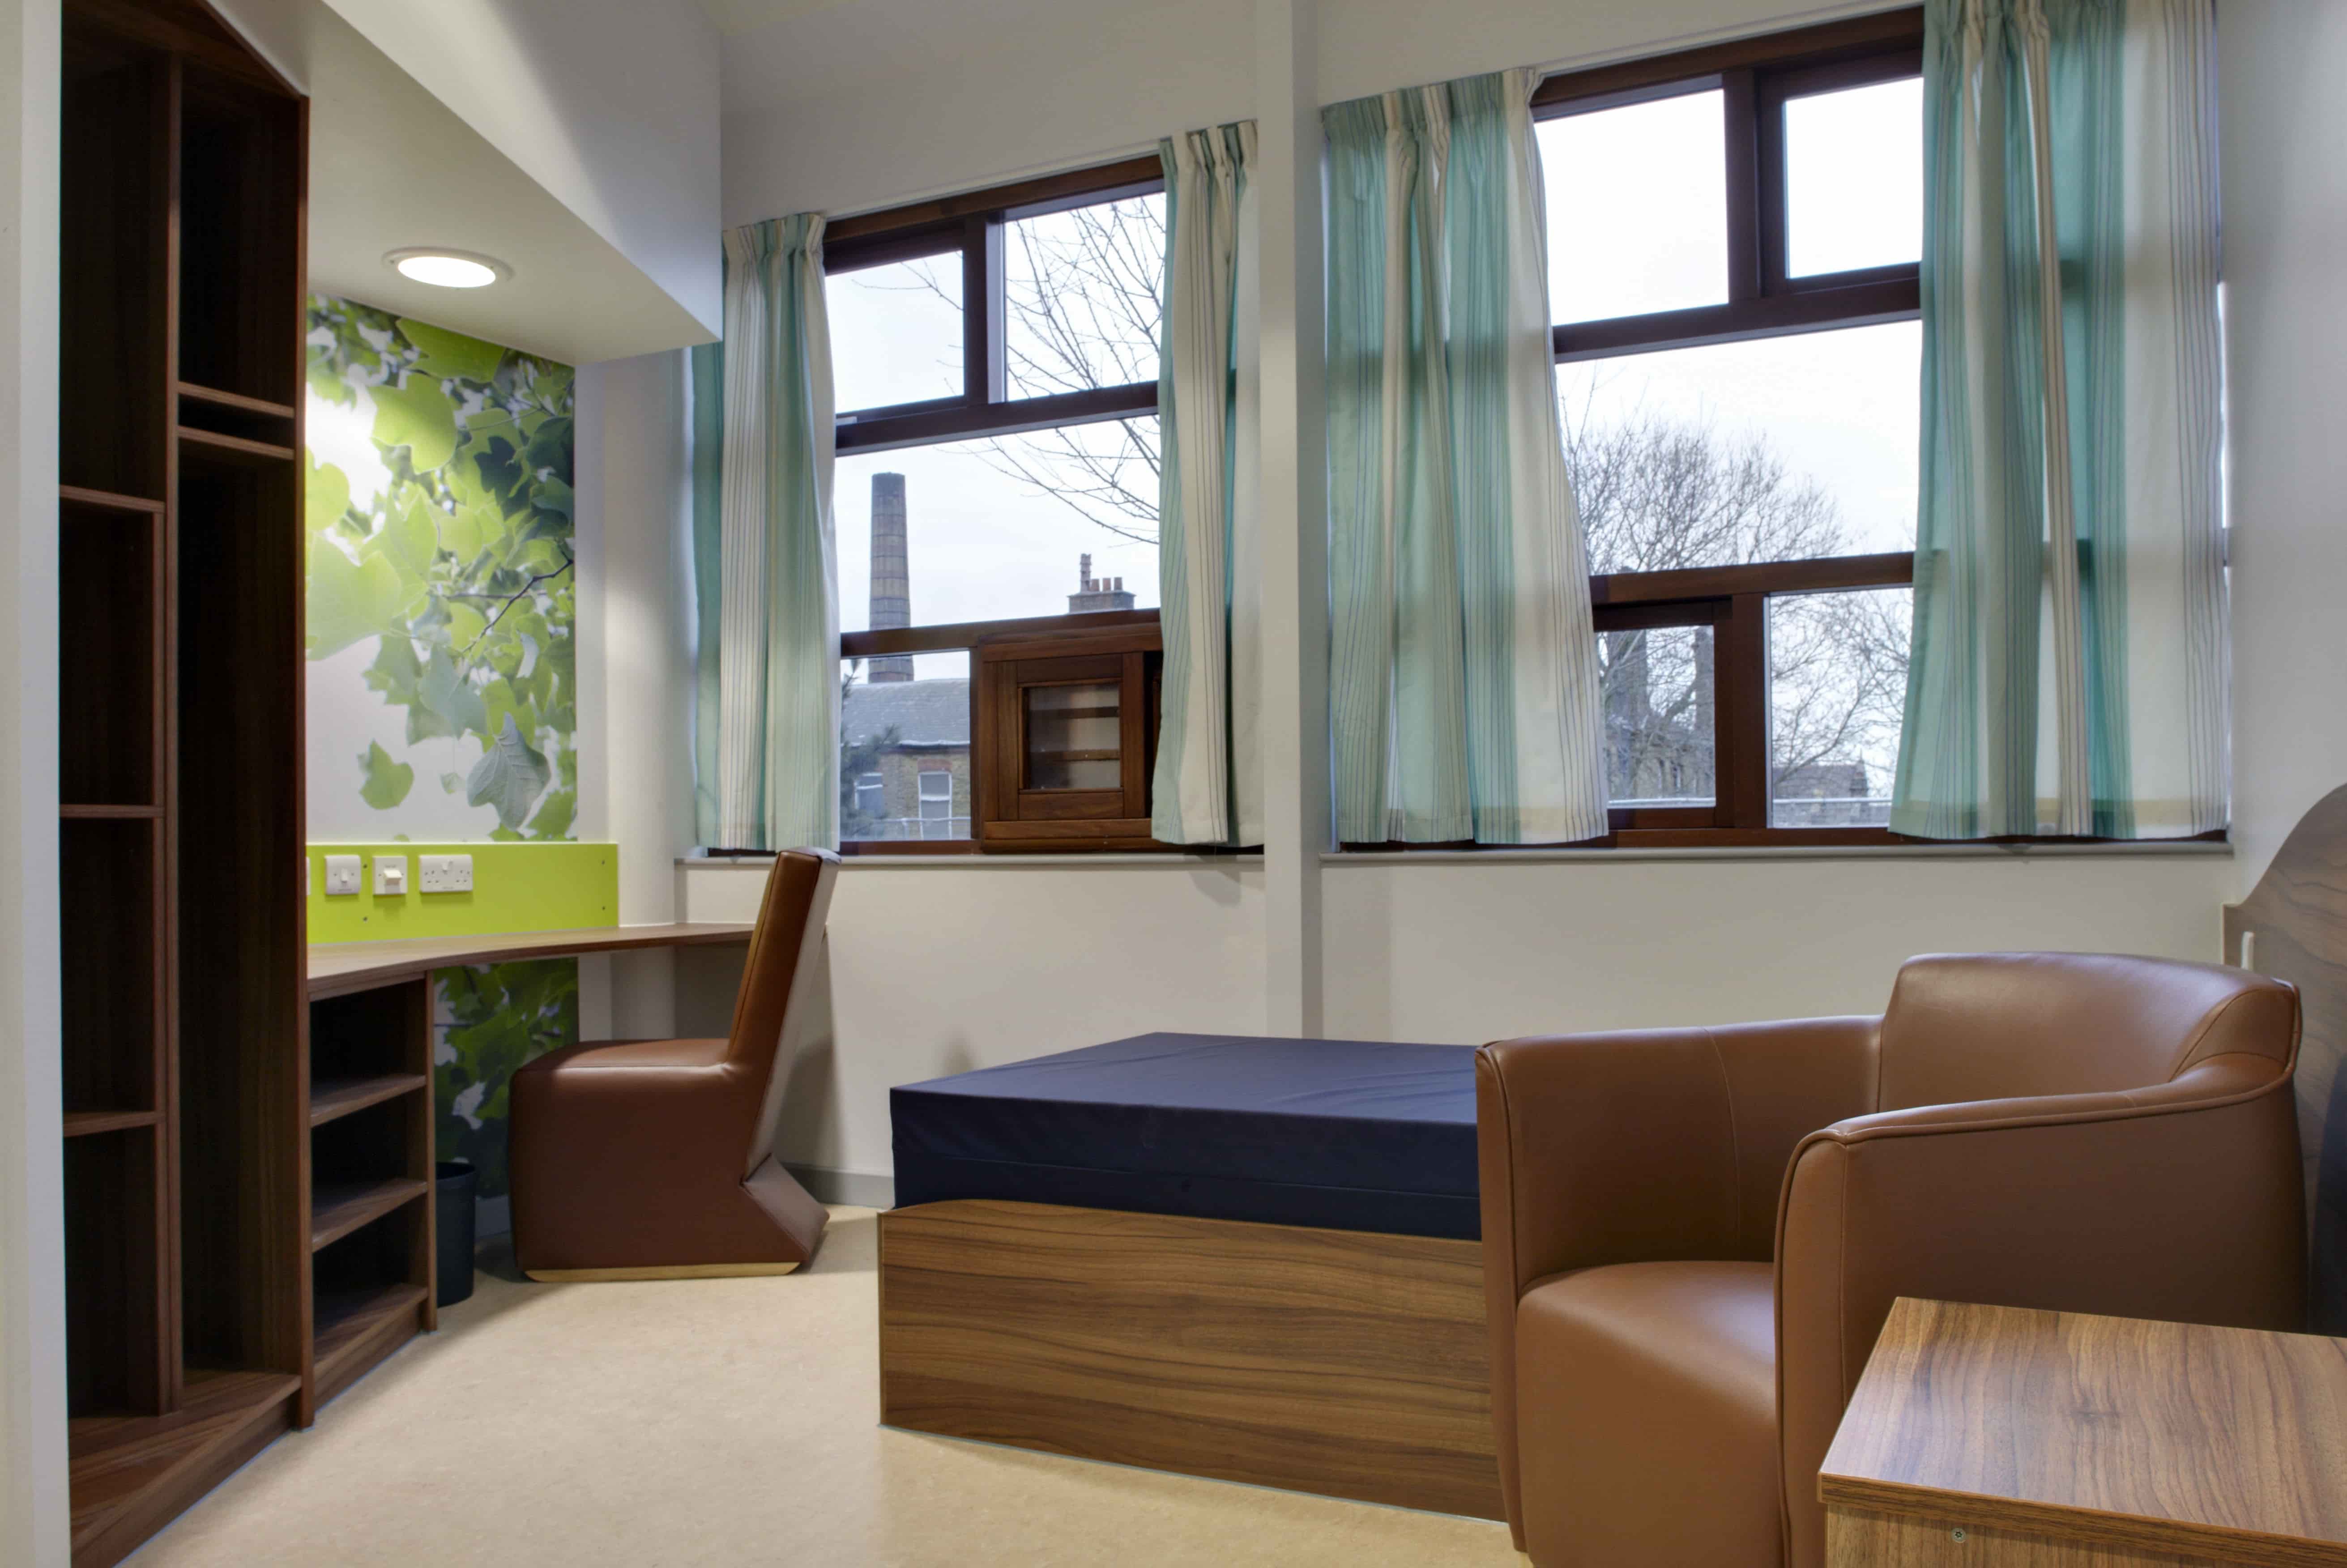 A single bedroom in Springfield University Hospital with a leather armchair beside it. A study desk and storage is positioned opposite the bed.